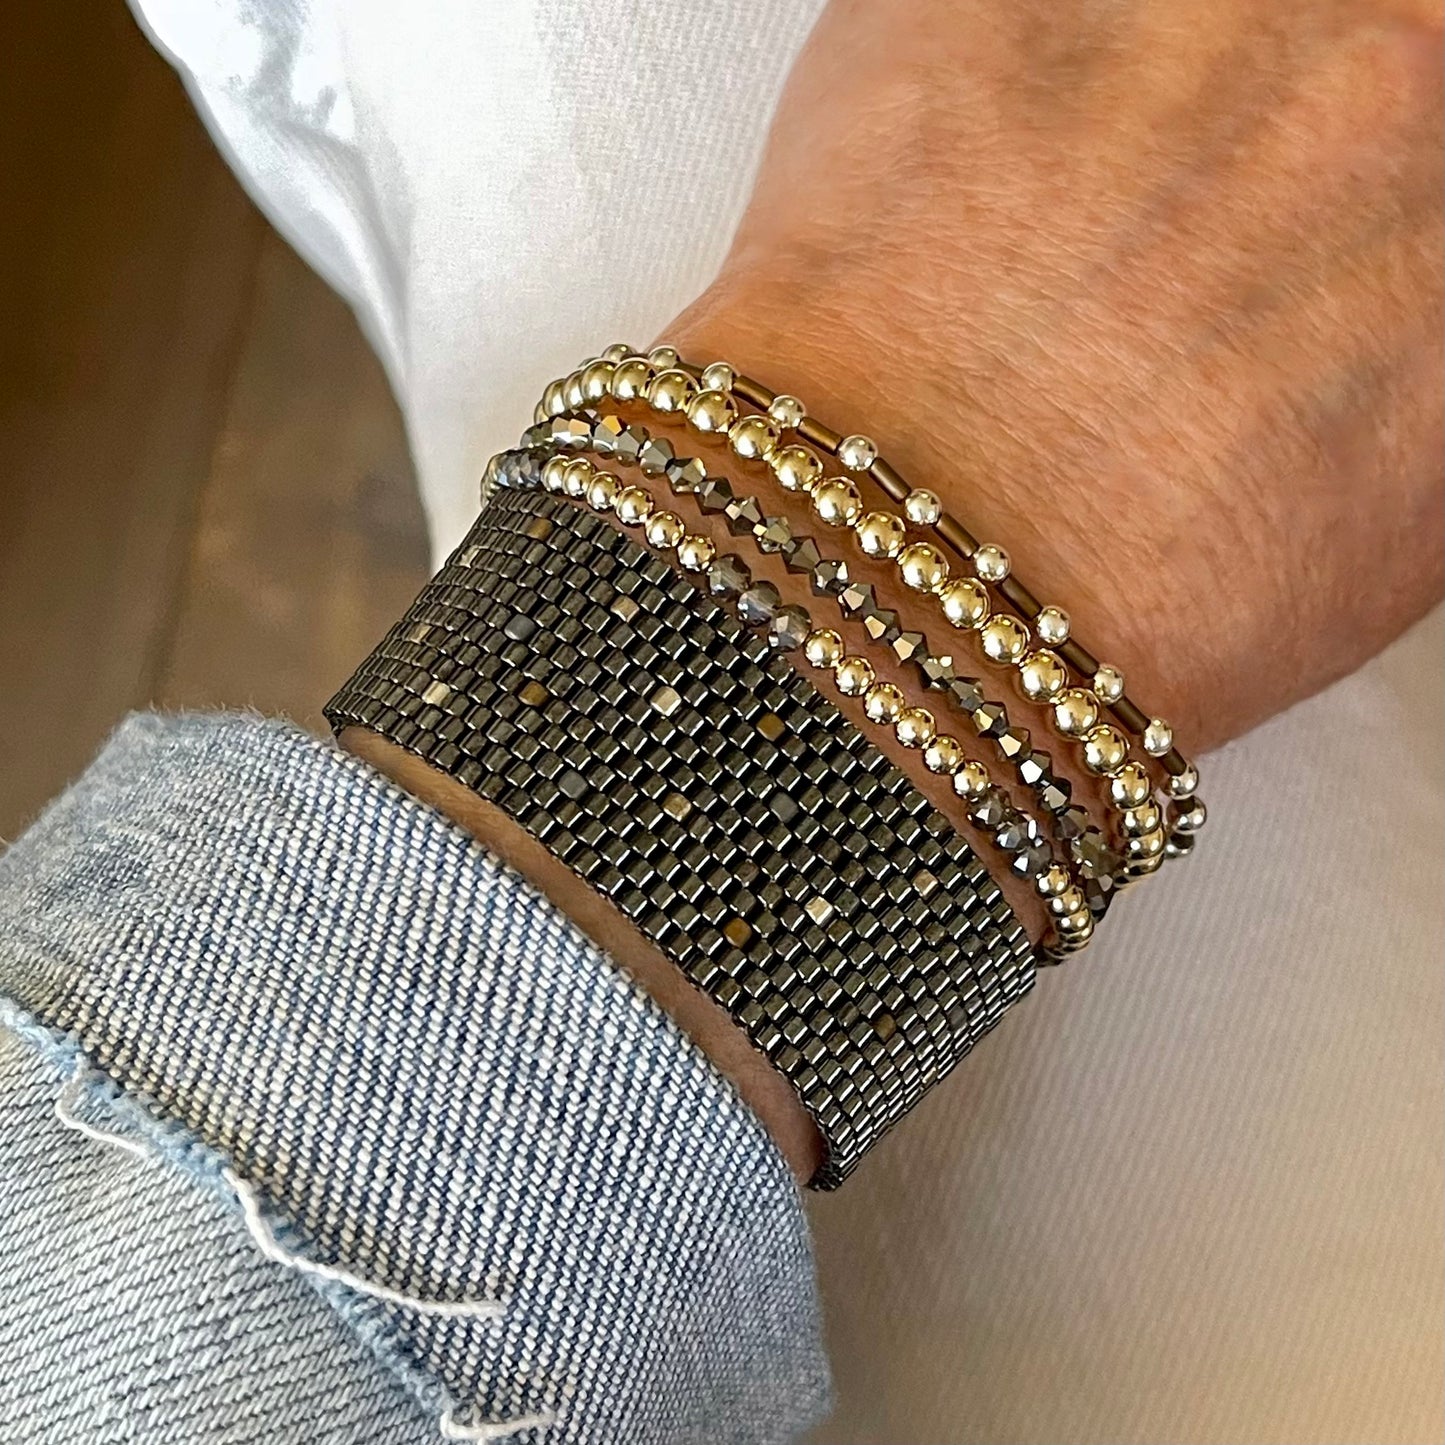 Wide gunmetal cuff and mixed metal bracelet stack. 14K gold filled, sterling silver, crystal, and bronze seed bead bracelets.